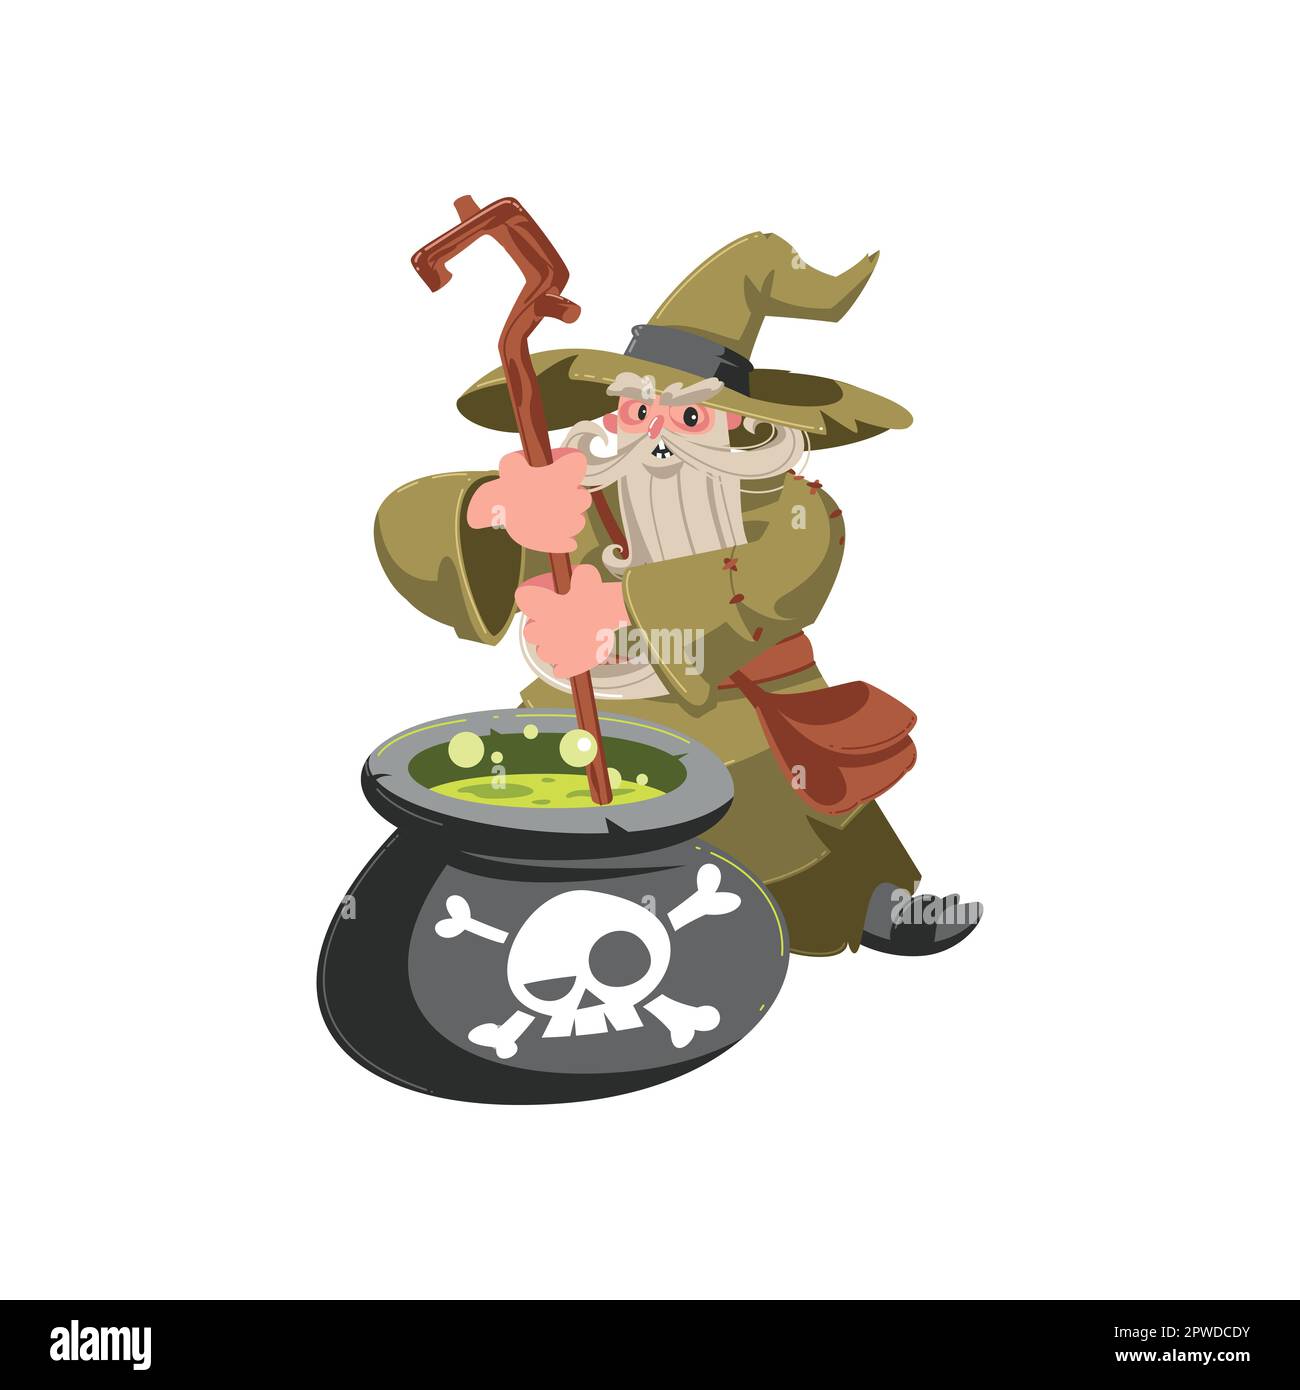 Idea] Have a wizard standing on a stool stirring the spell pot : r